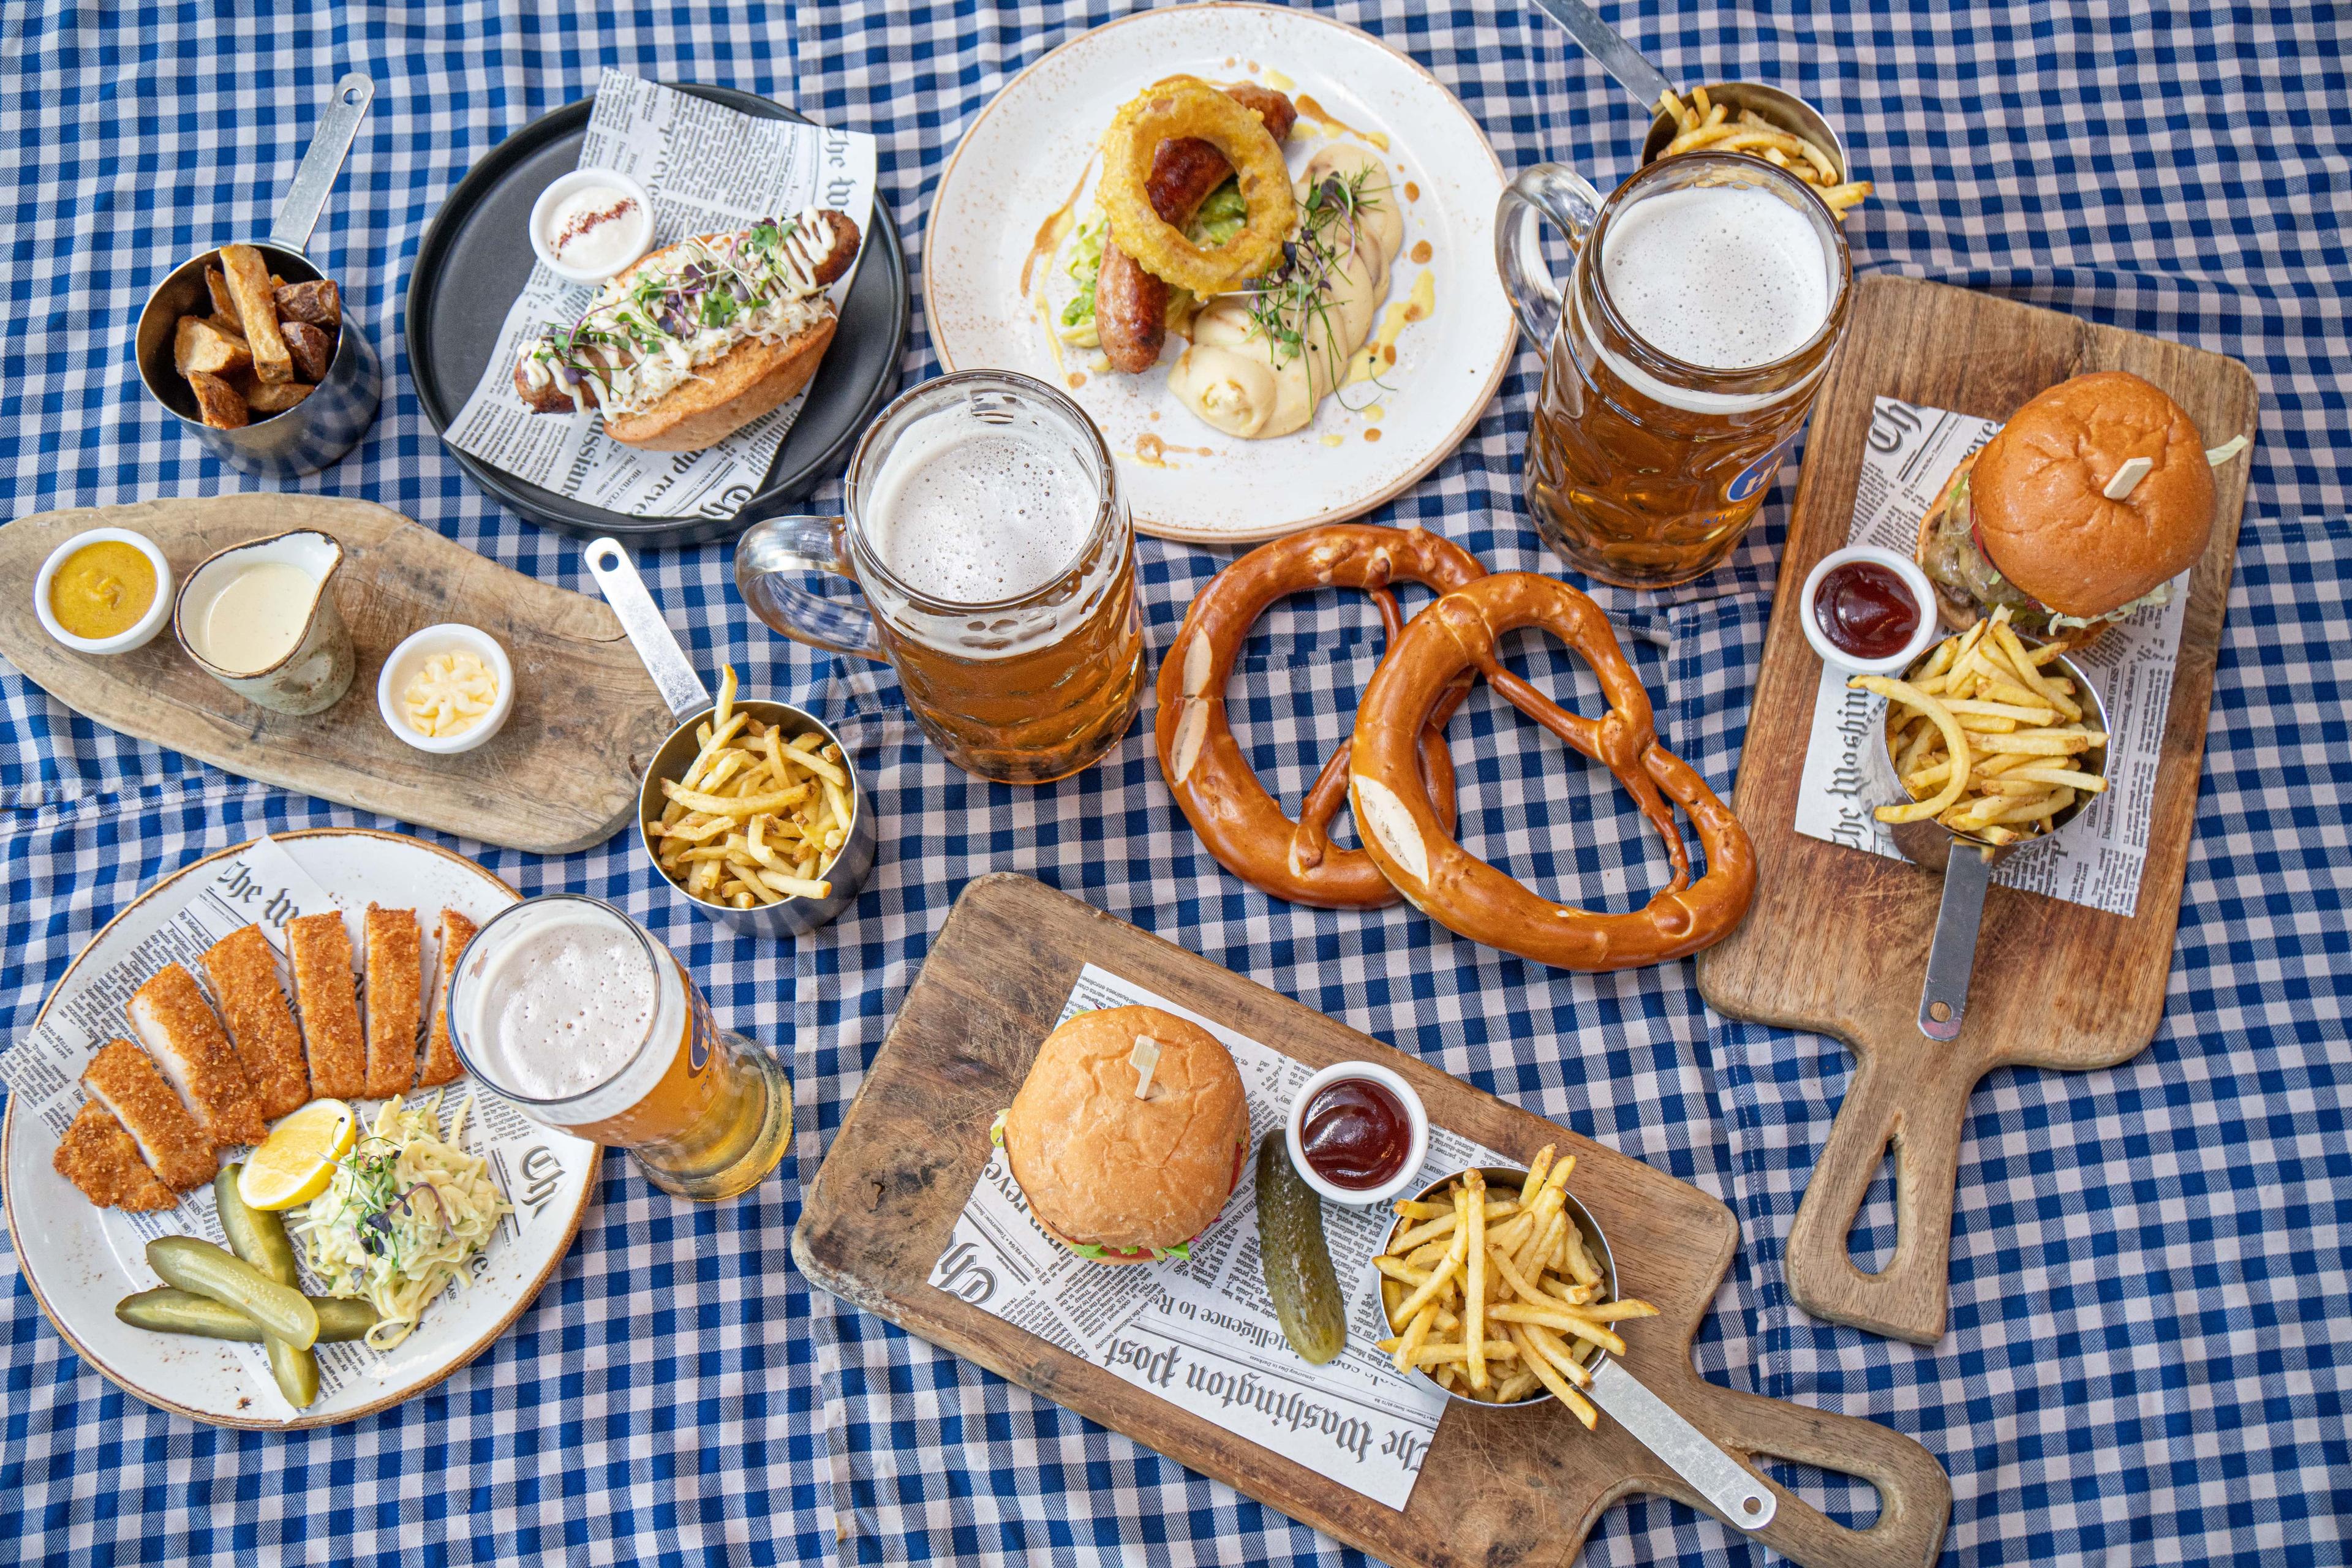 OKTOBERFEST IN DUBAI 2021: ENJOY LIP-SMACKING FOOD AND DRINKS SPECIALS AT THE SCENE BY SIMON RIMMER